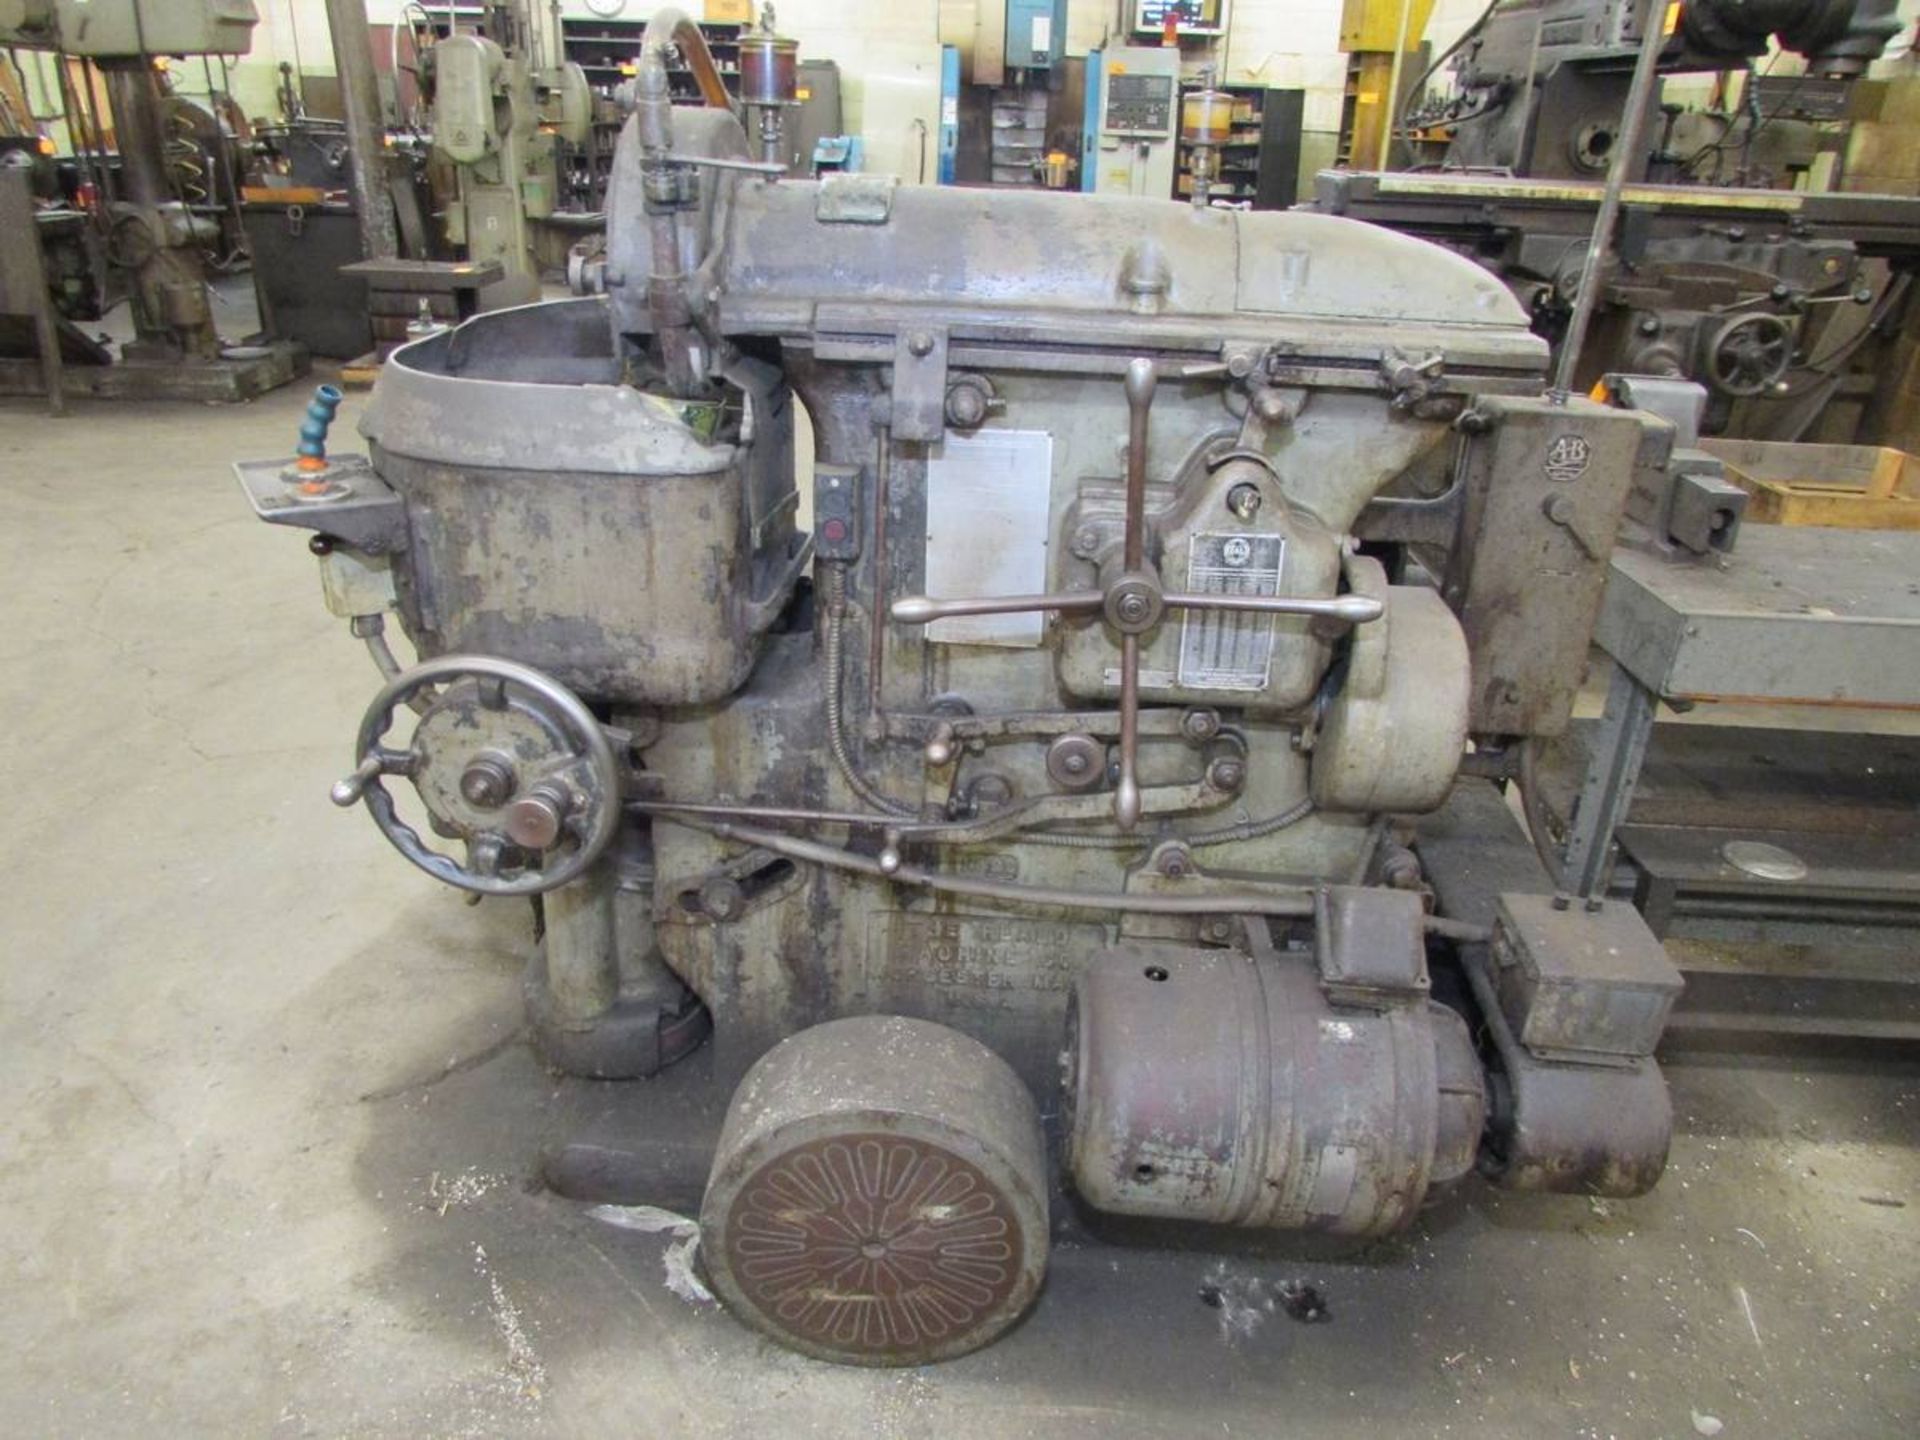 Heald Machine Co No. 22 12" Rotary Surface Grinder - Image 6 of 8